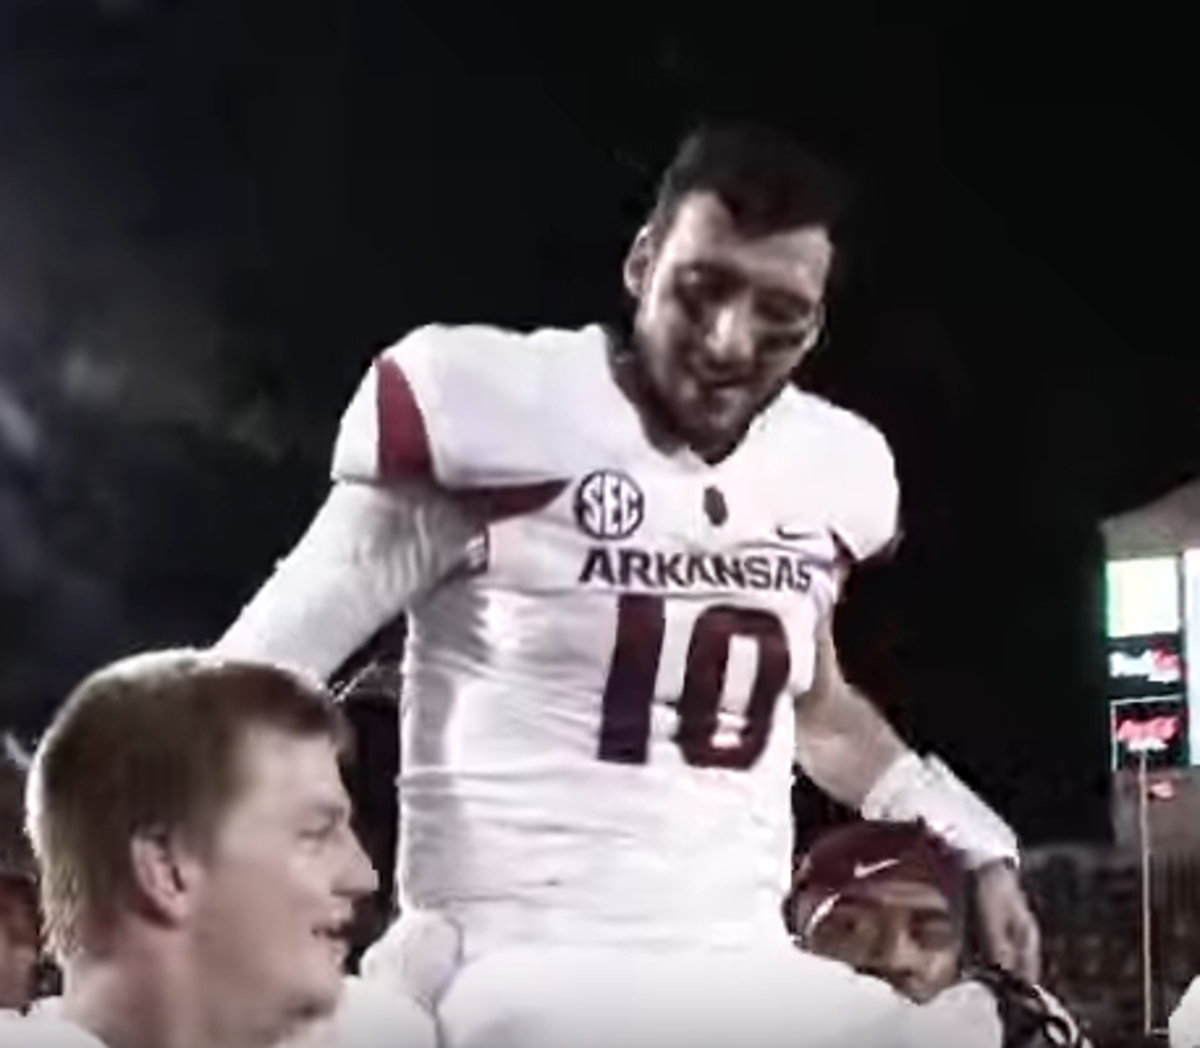 Arkansas player getting carried off the field after a big win.